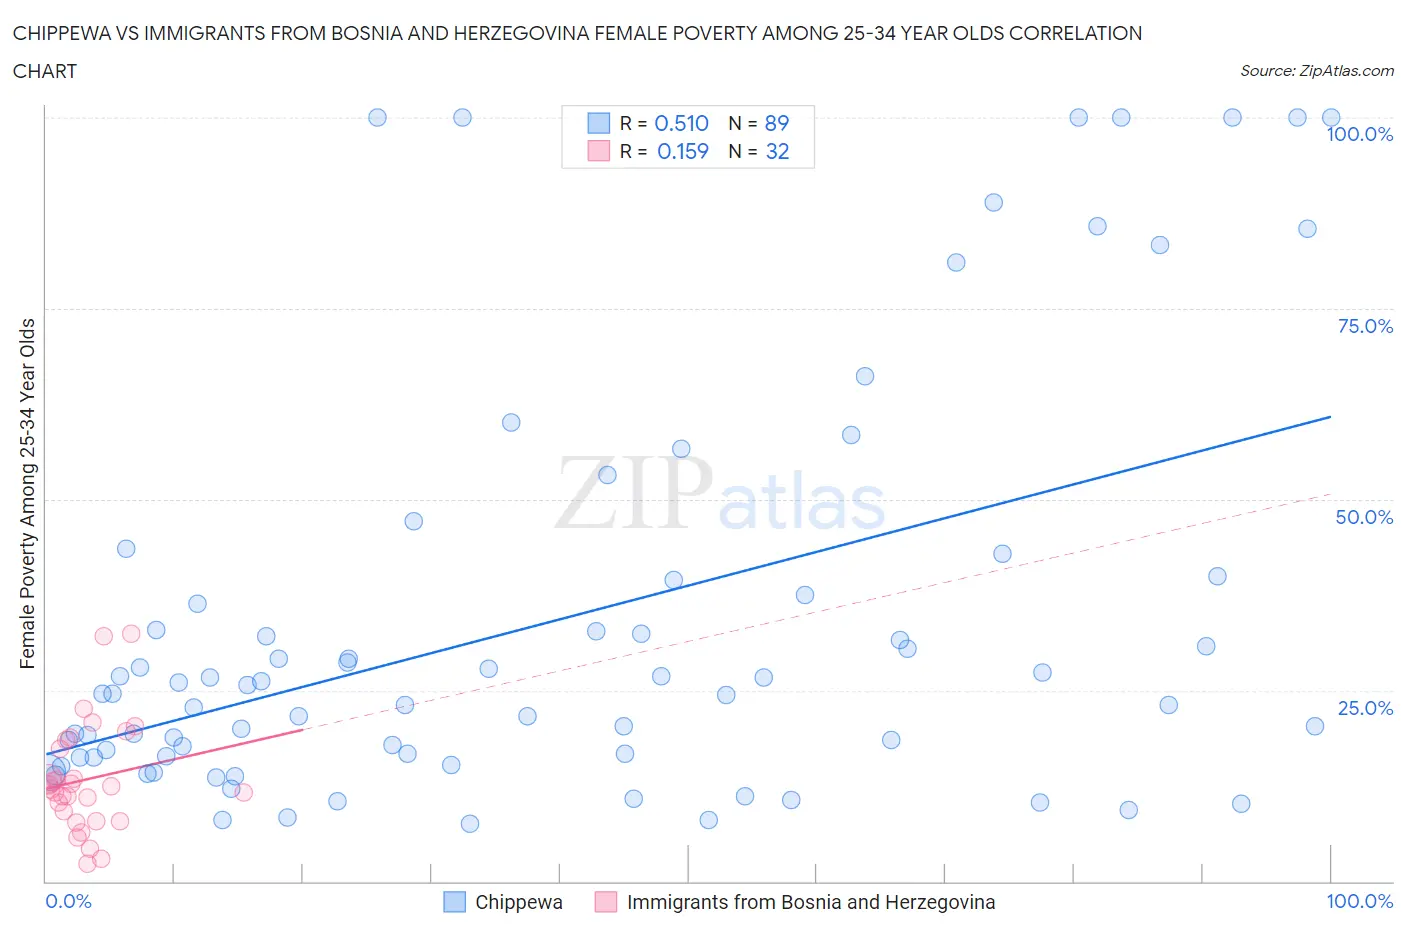 Chippewa vs Immigrants from Bosnia and Herzegovina Female Poverty Among 25-34 Year Olds